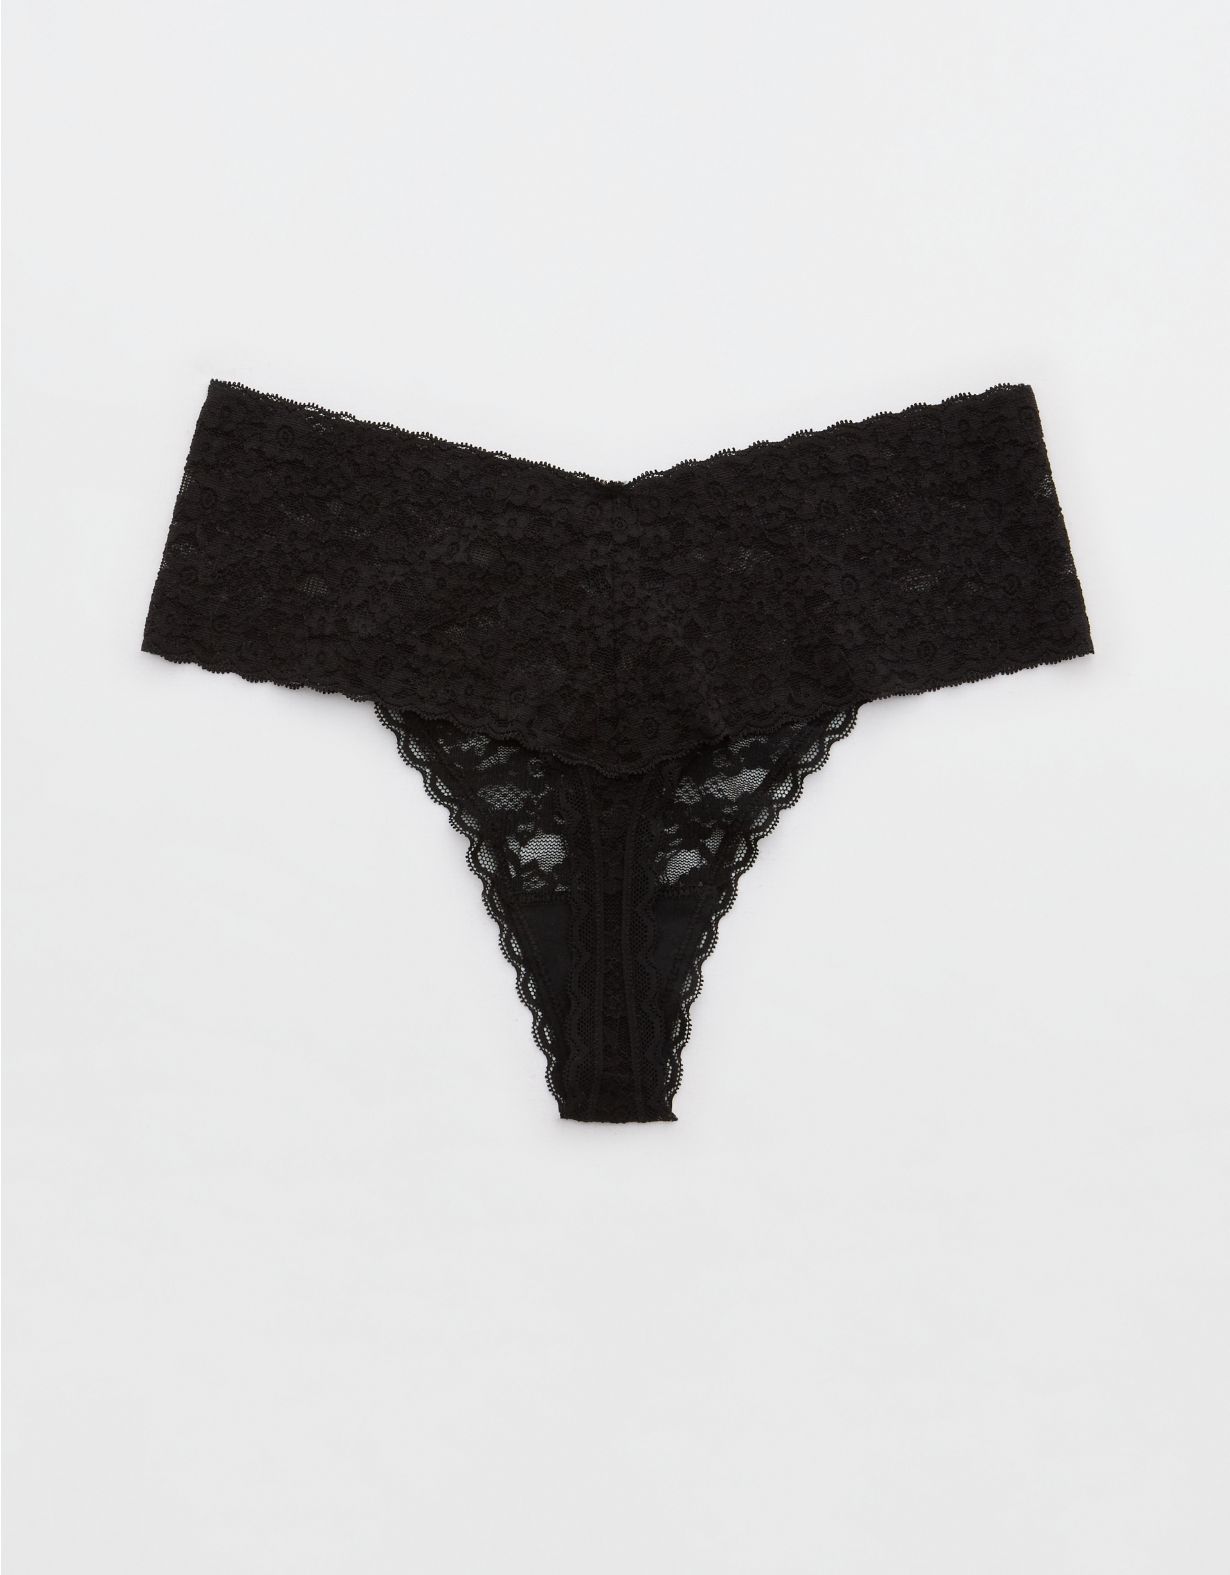 Show Off Vintage Lace Thong Underwear